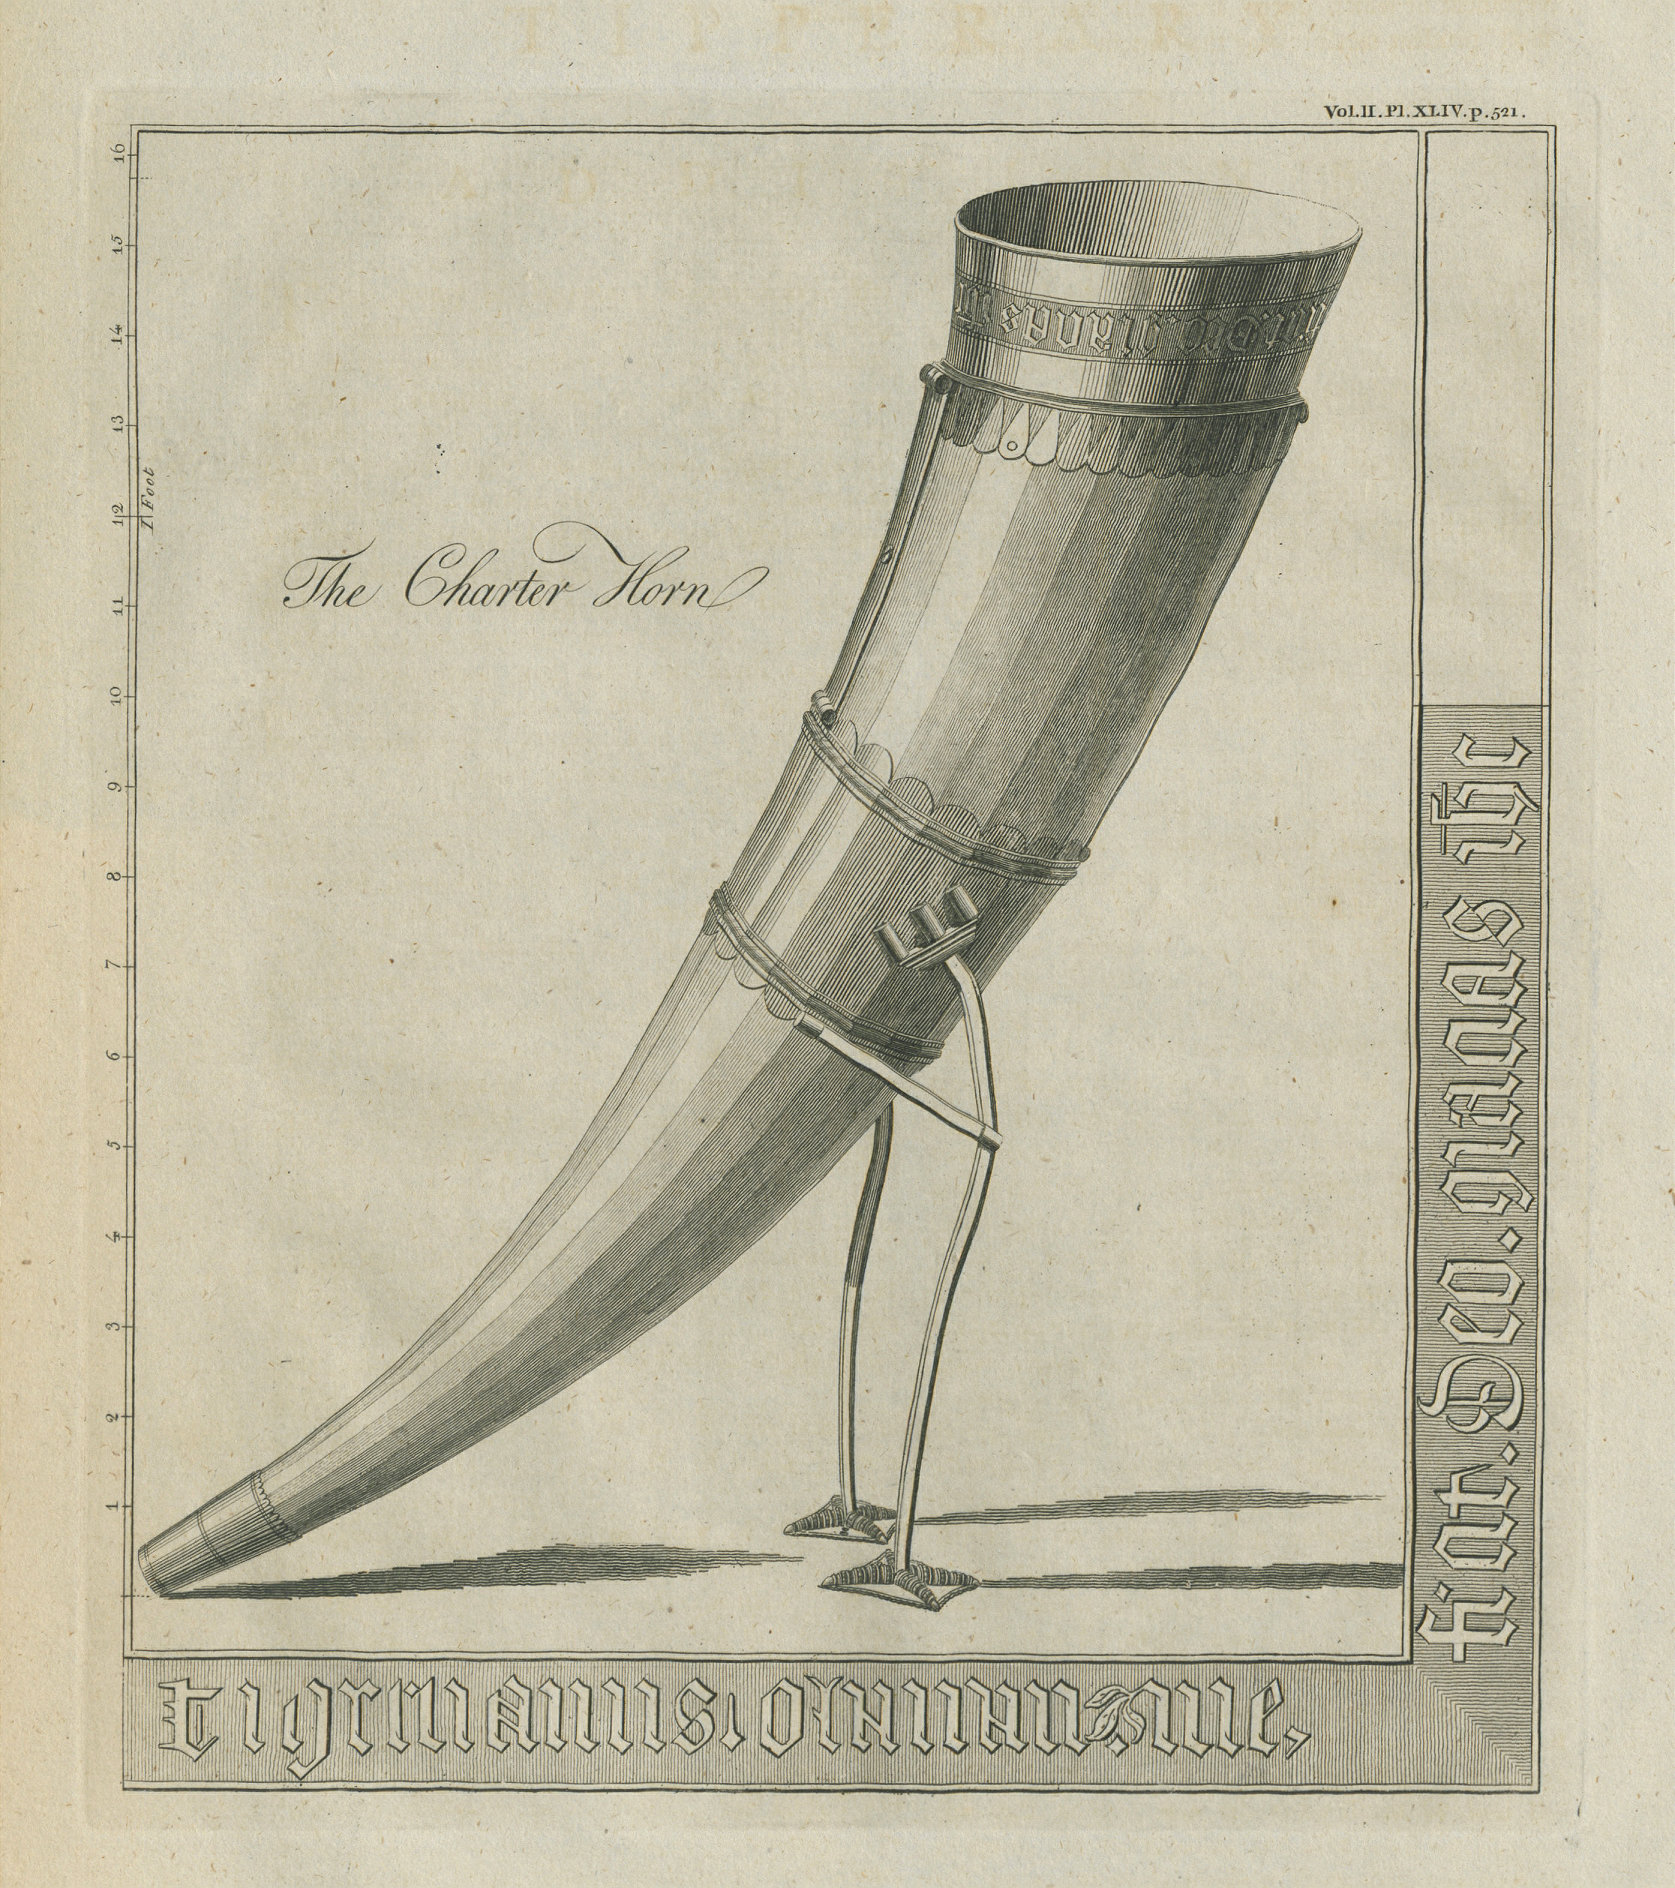 Associate Product The Kavanagh Charter Horn. Ceremonial drinking horn 1789 old antique print